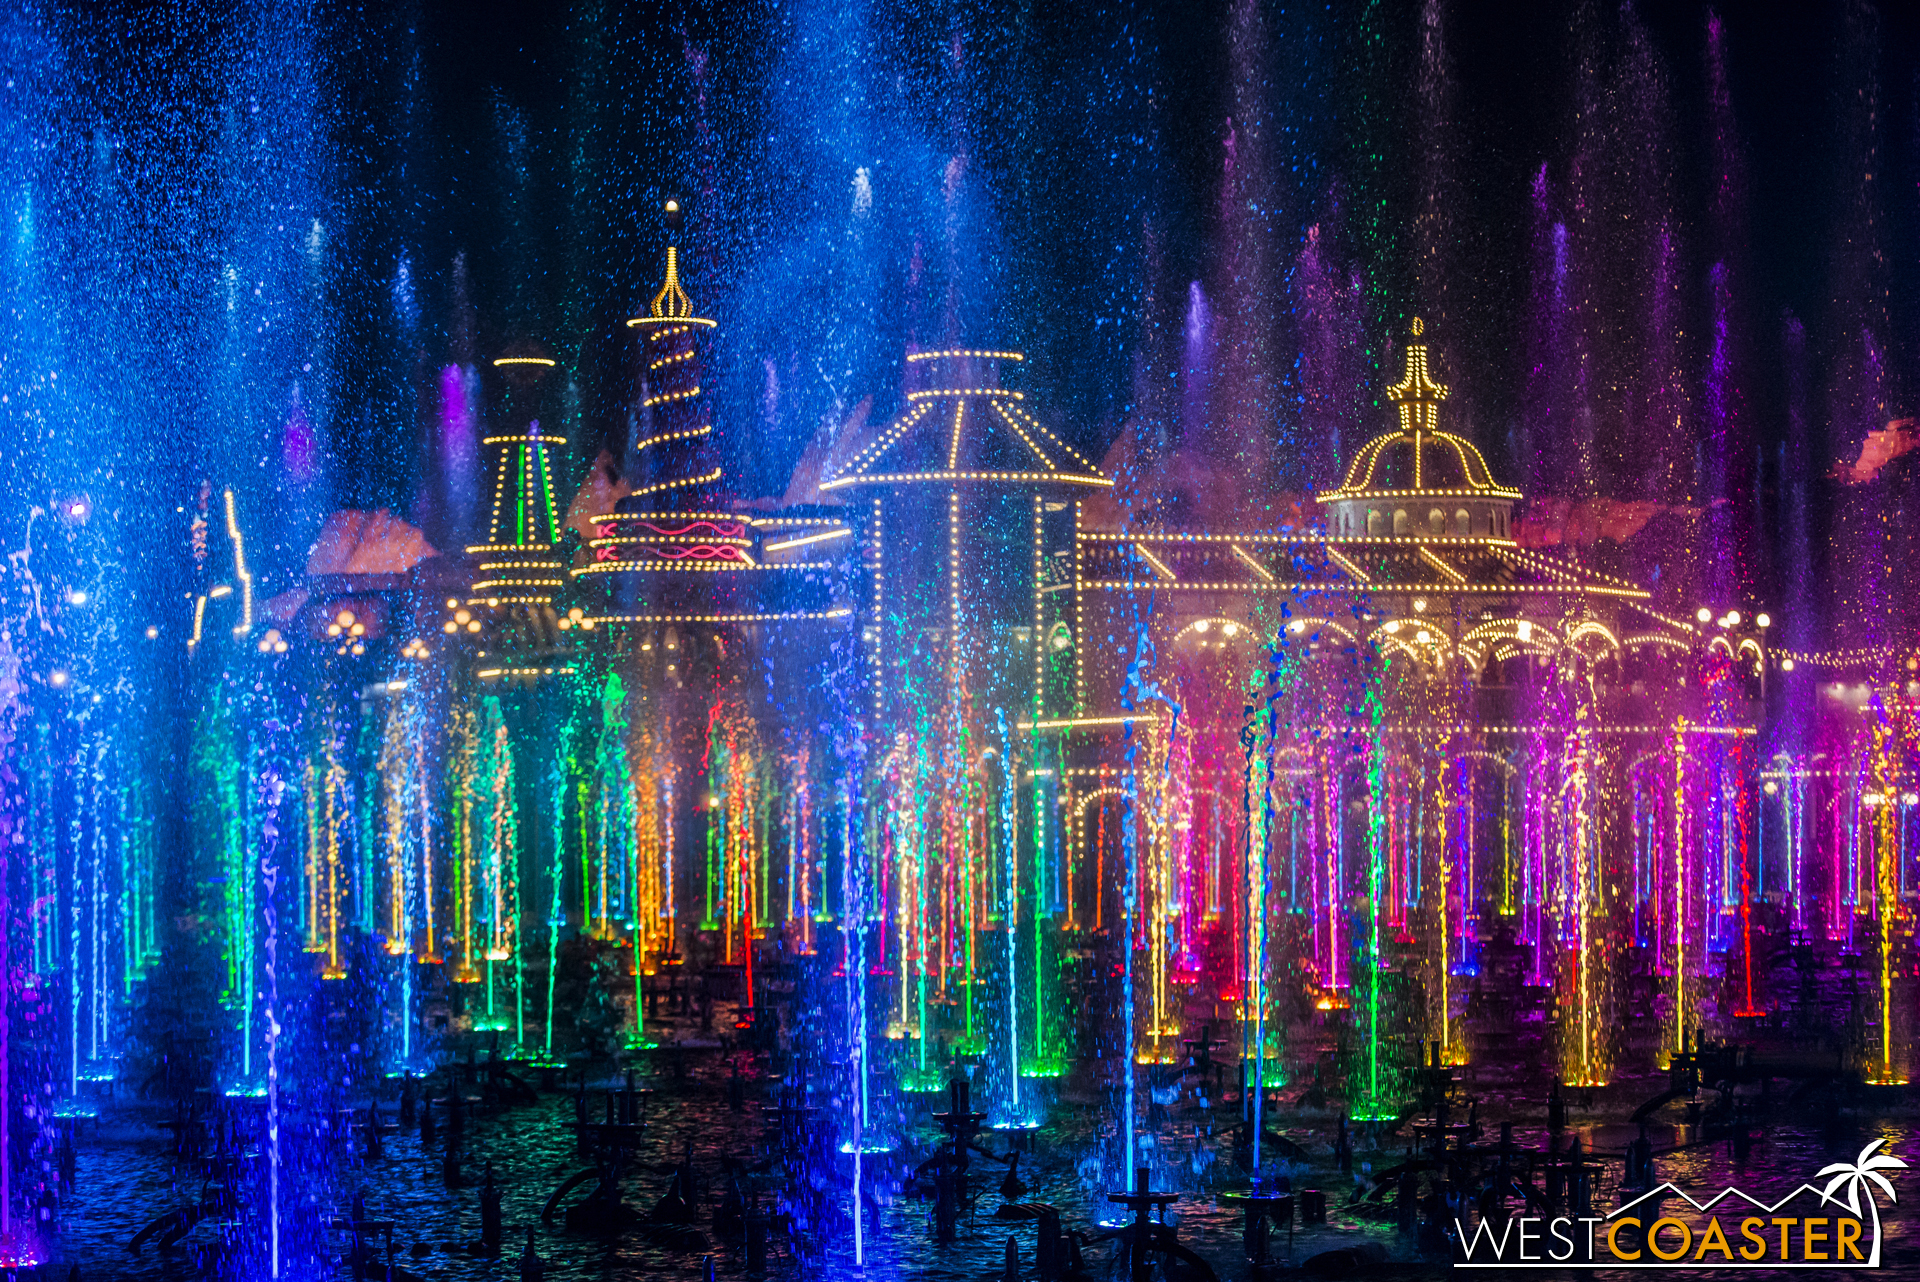  It's just an upbeat closing song with the fountains dancing, but it's very pretty. 